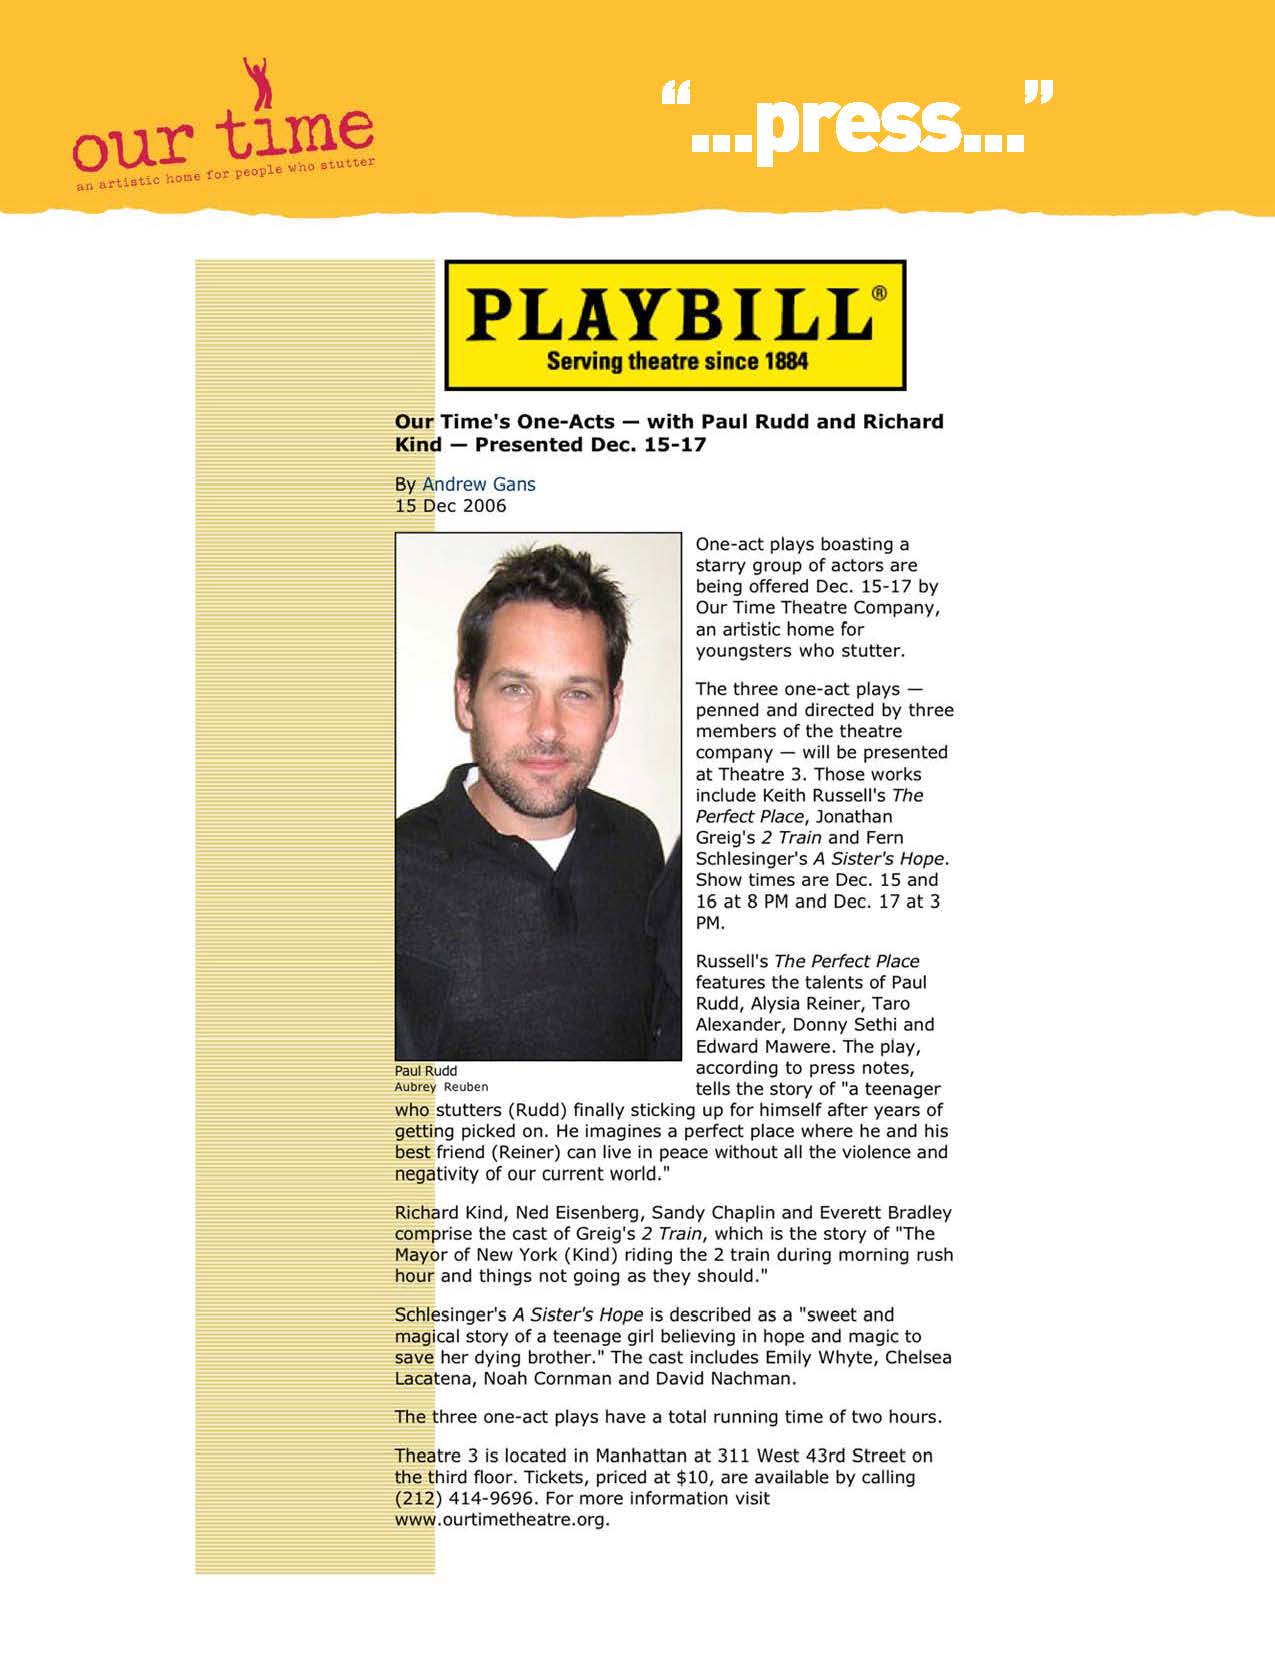 One-Acts with Paul Rudd &#038; Richard Kind